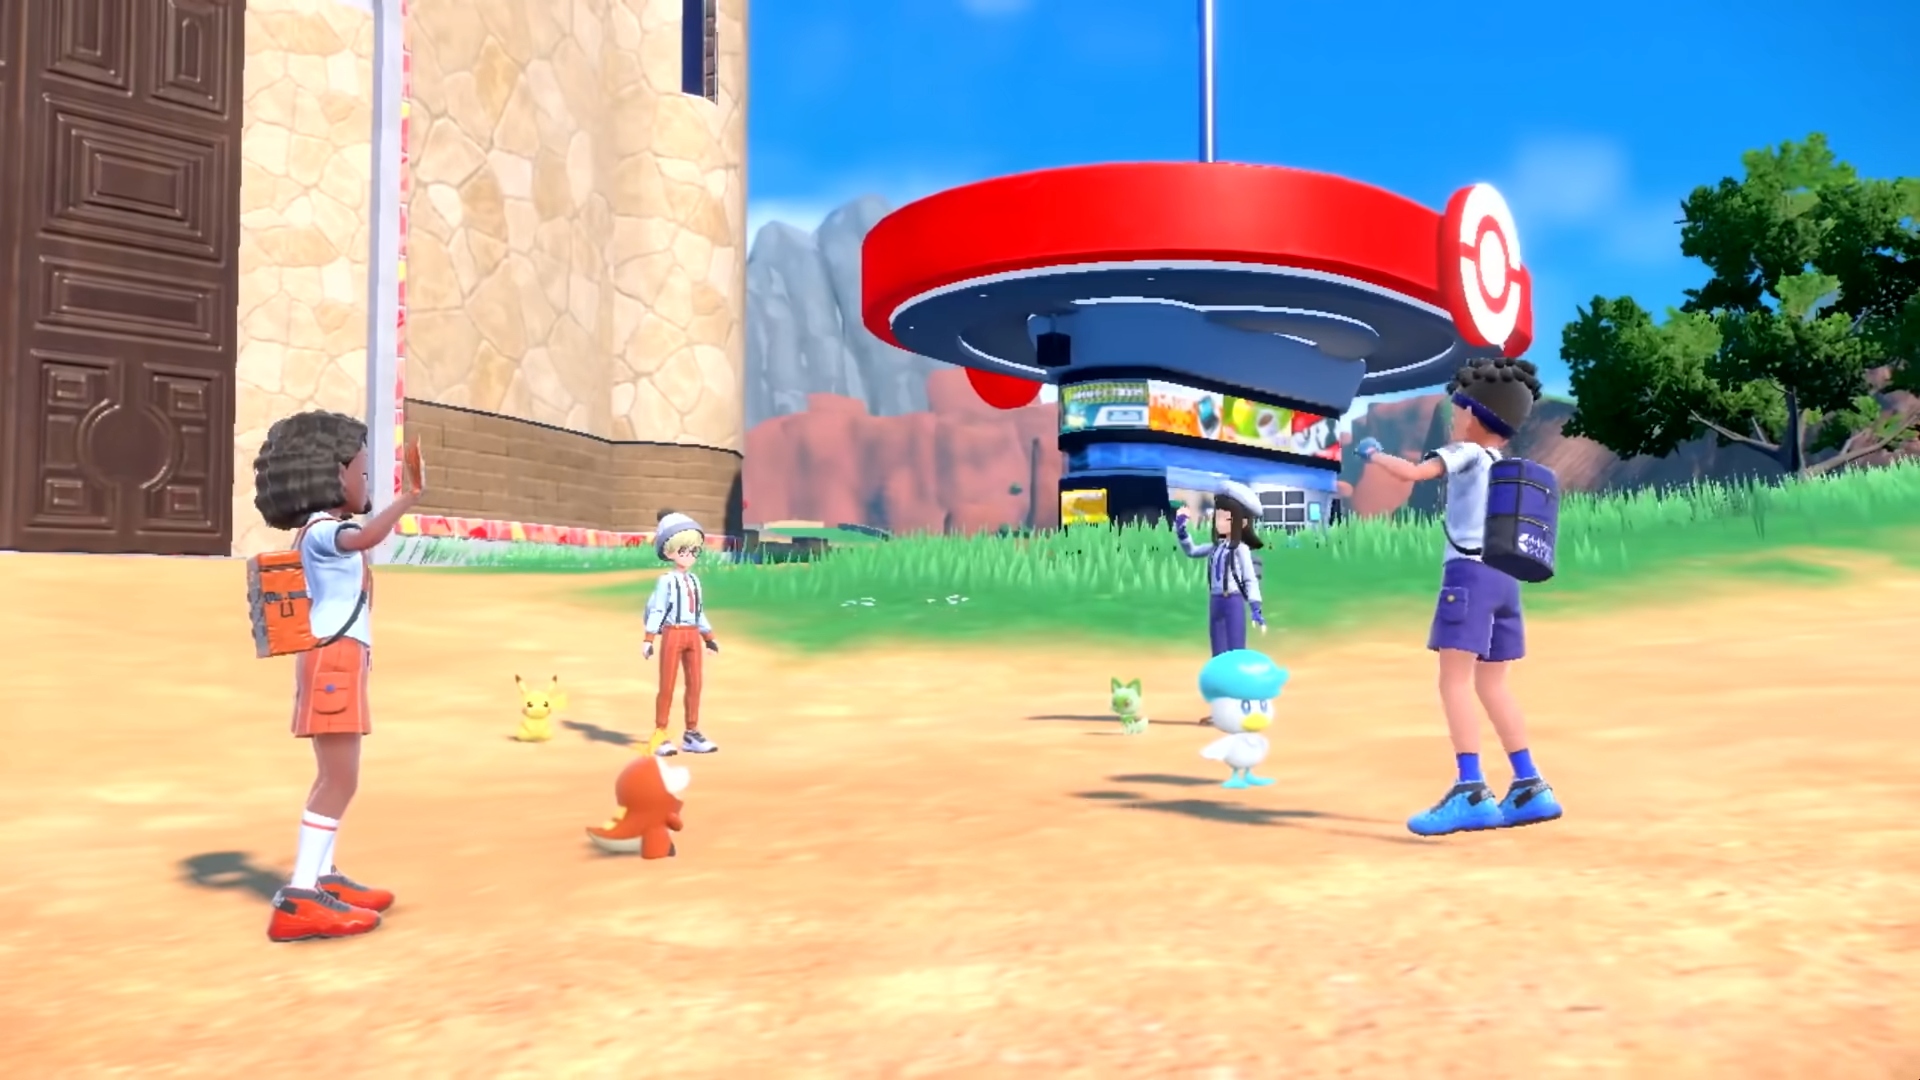 Pokémon Switch games - a scene from the Pokémon Scarlet and Violet trailer shows four trainers standing outside with their Pokémon.